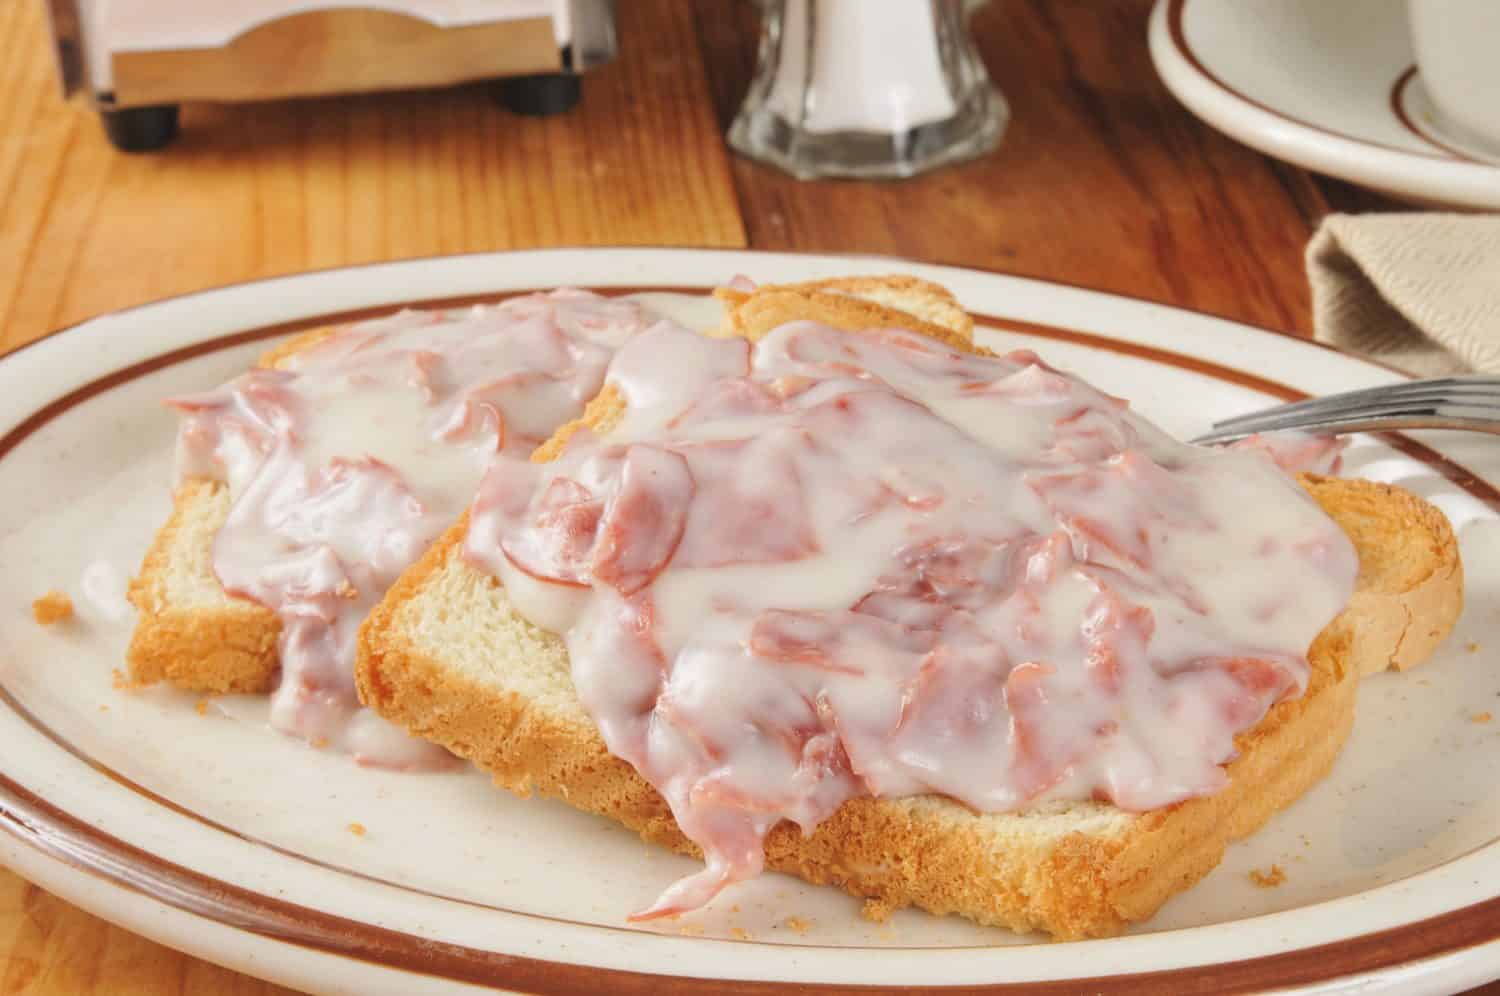 Creamed chipped beef on toast with a cup of coffee